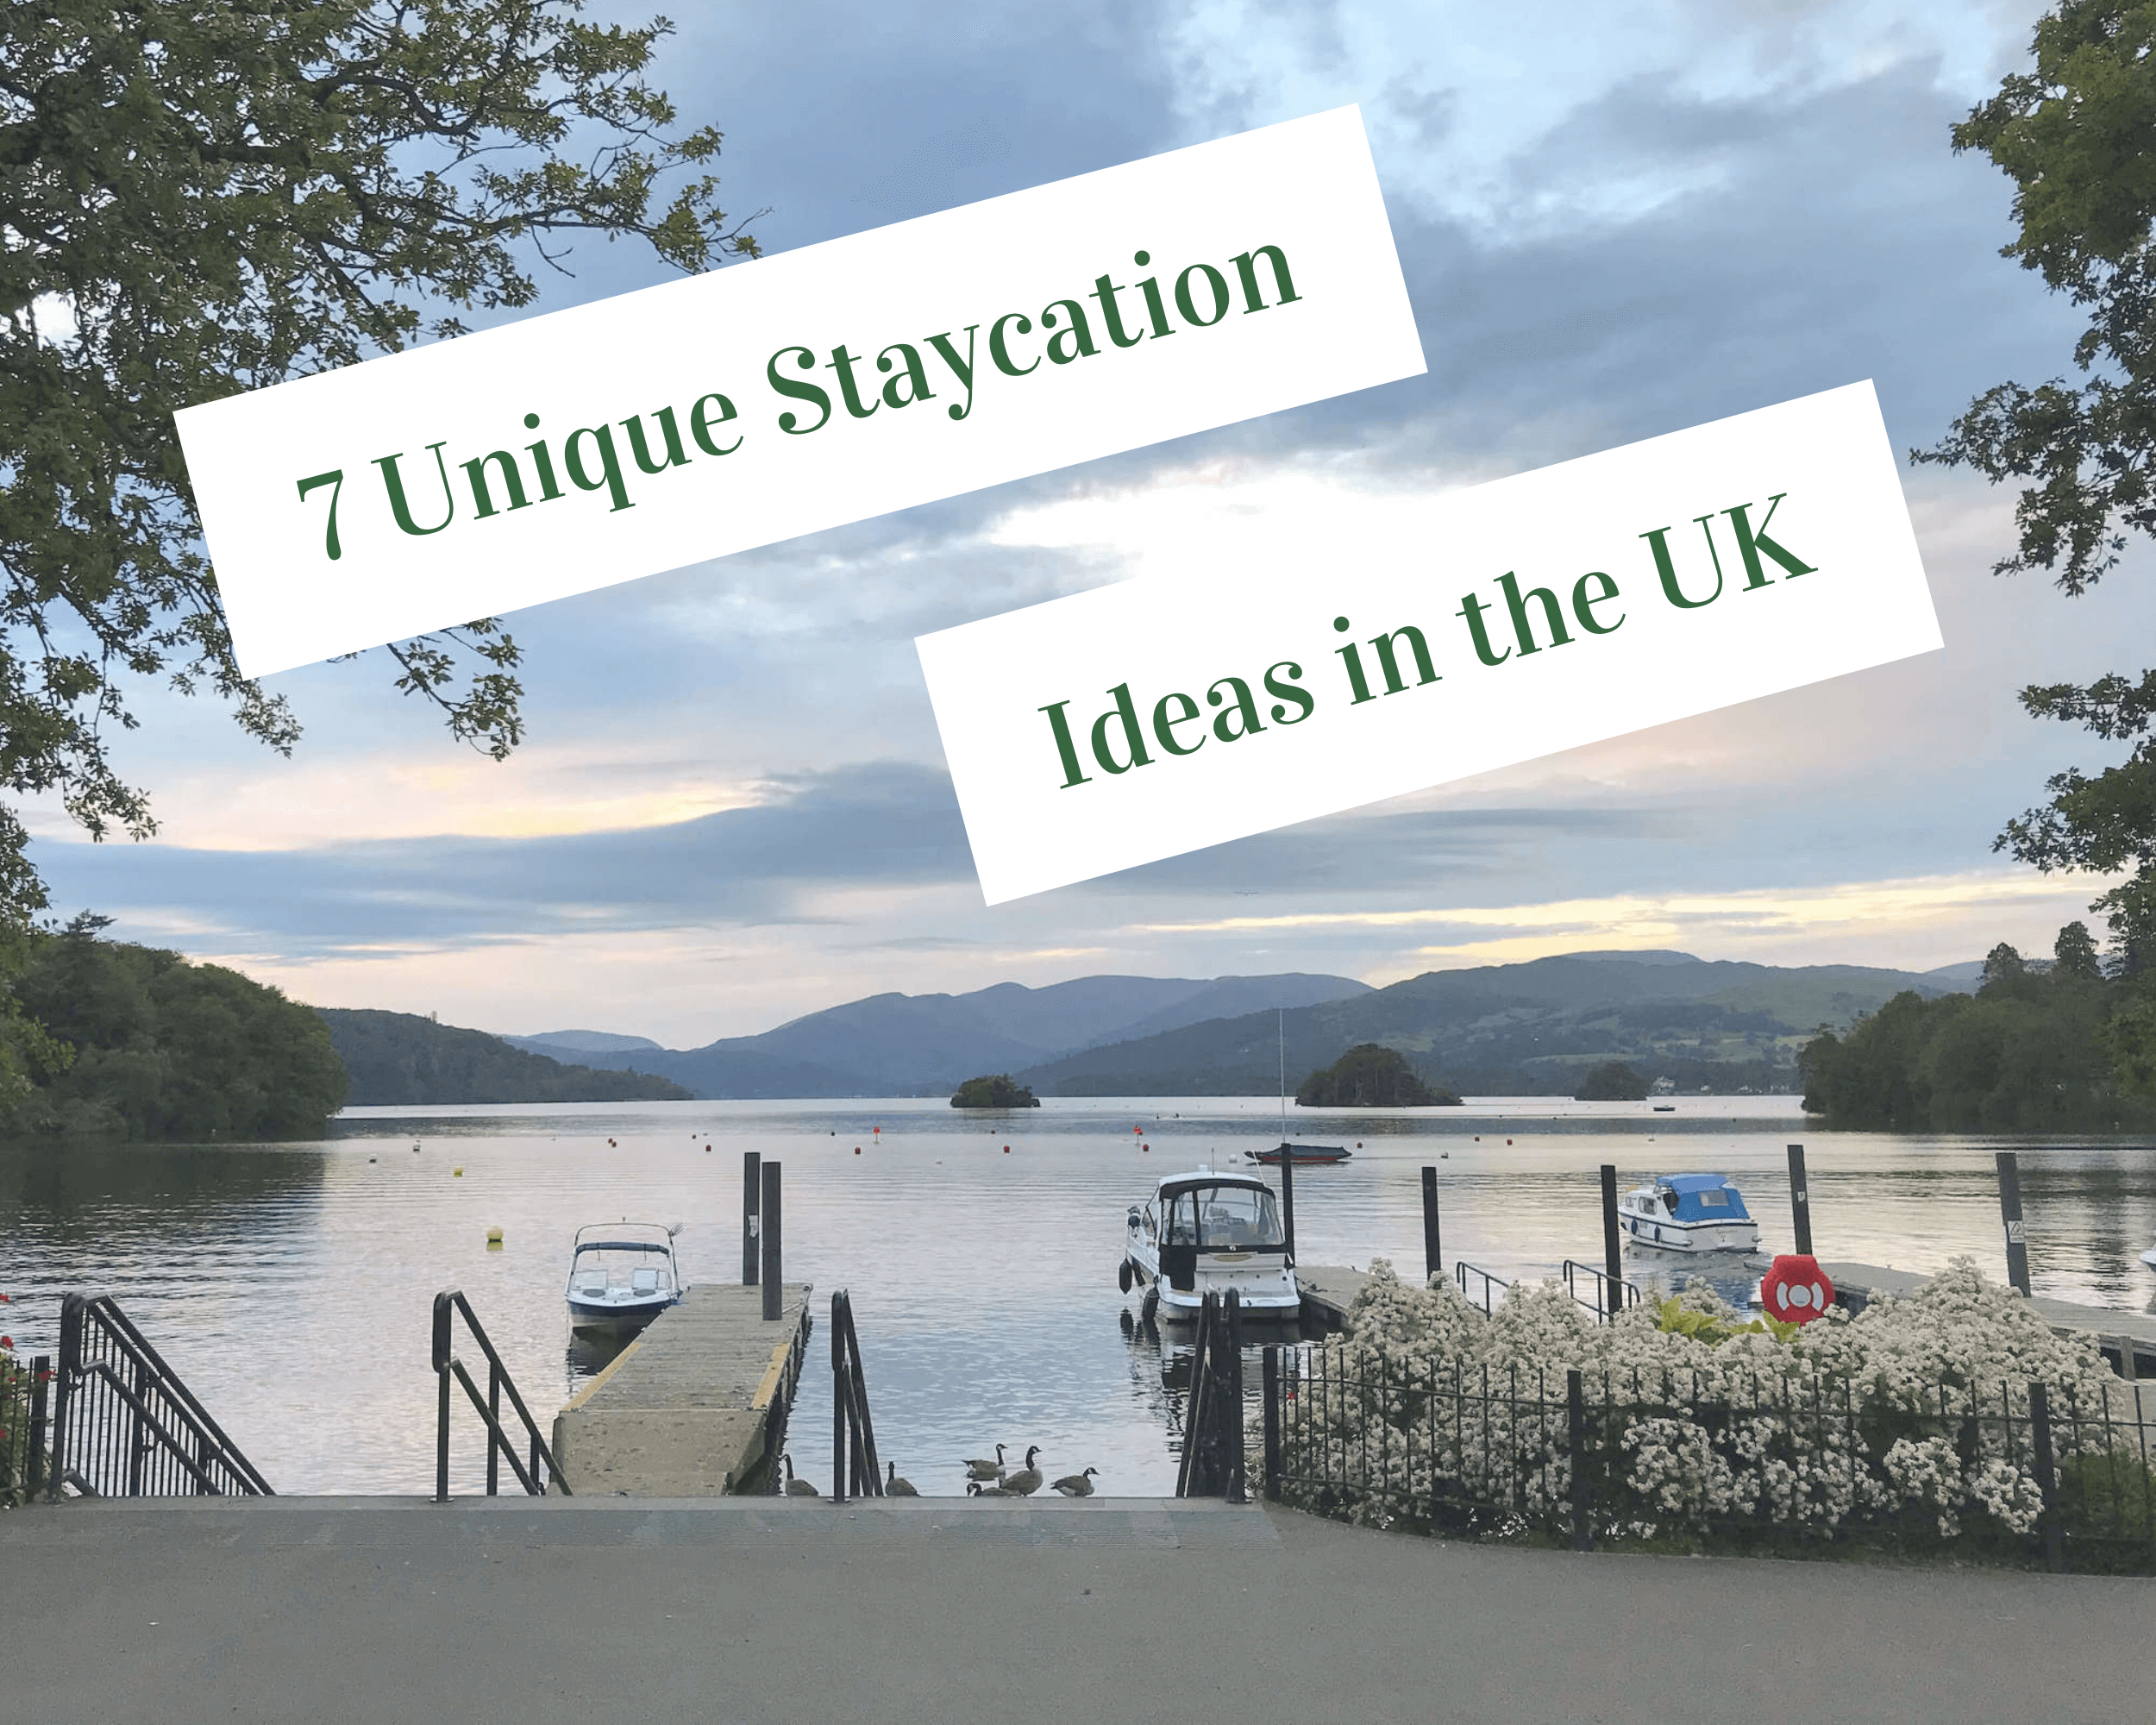 7 unique staycation ideas in the UK